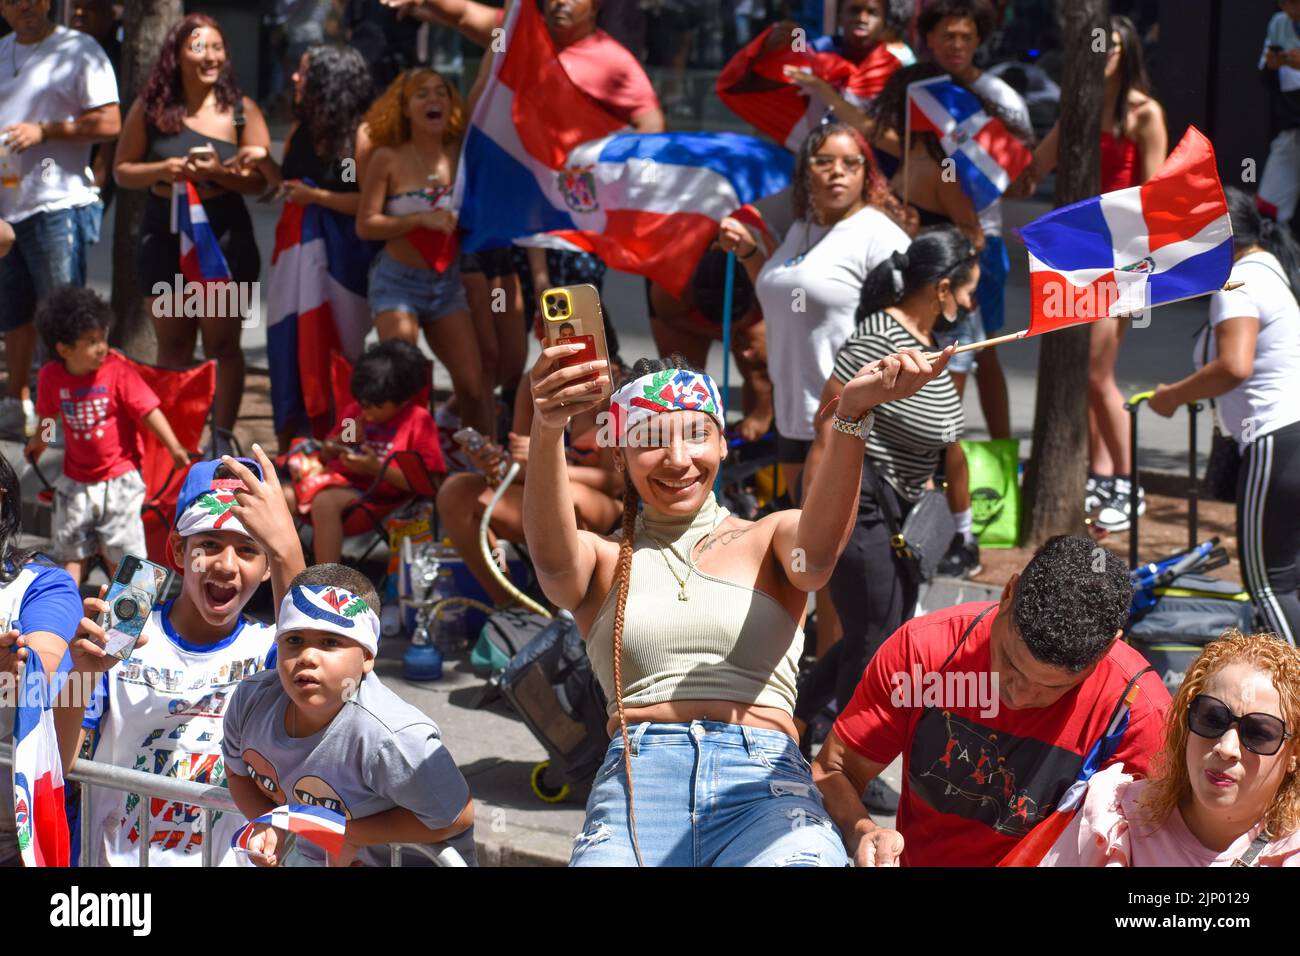 A participant is wearing dominican headband during the Dominican Day Parade on Sixth Avenue in New York City. Stock Photo